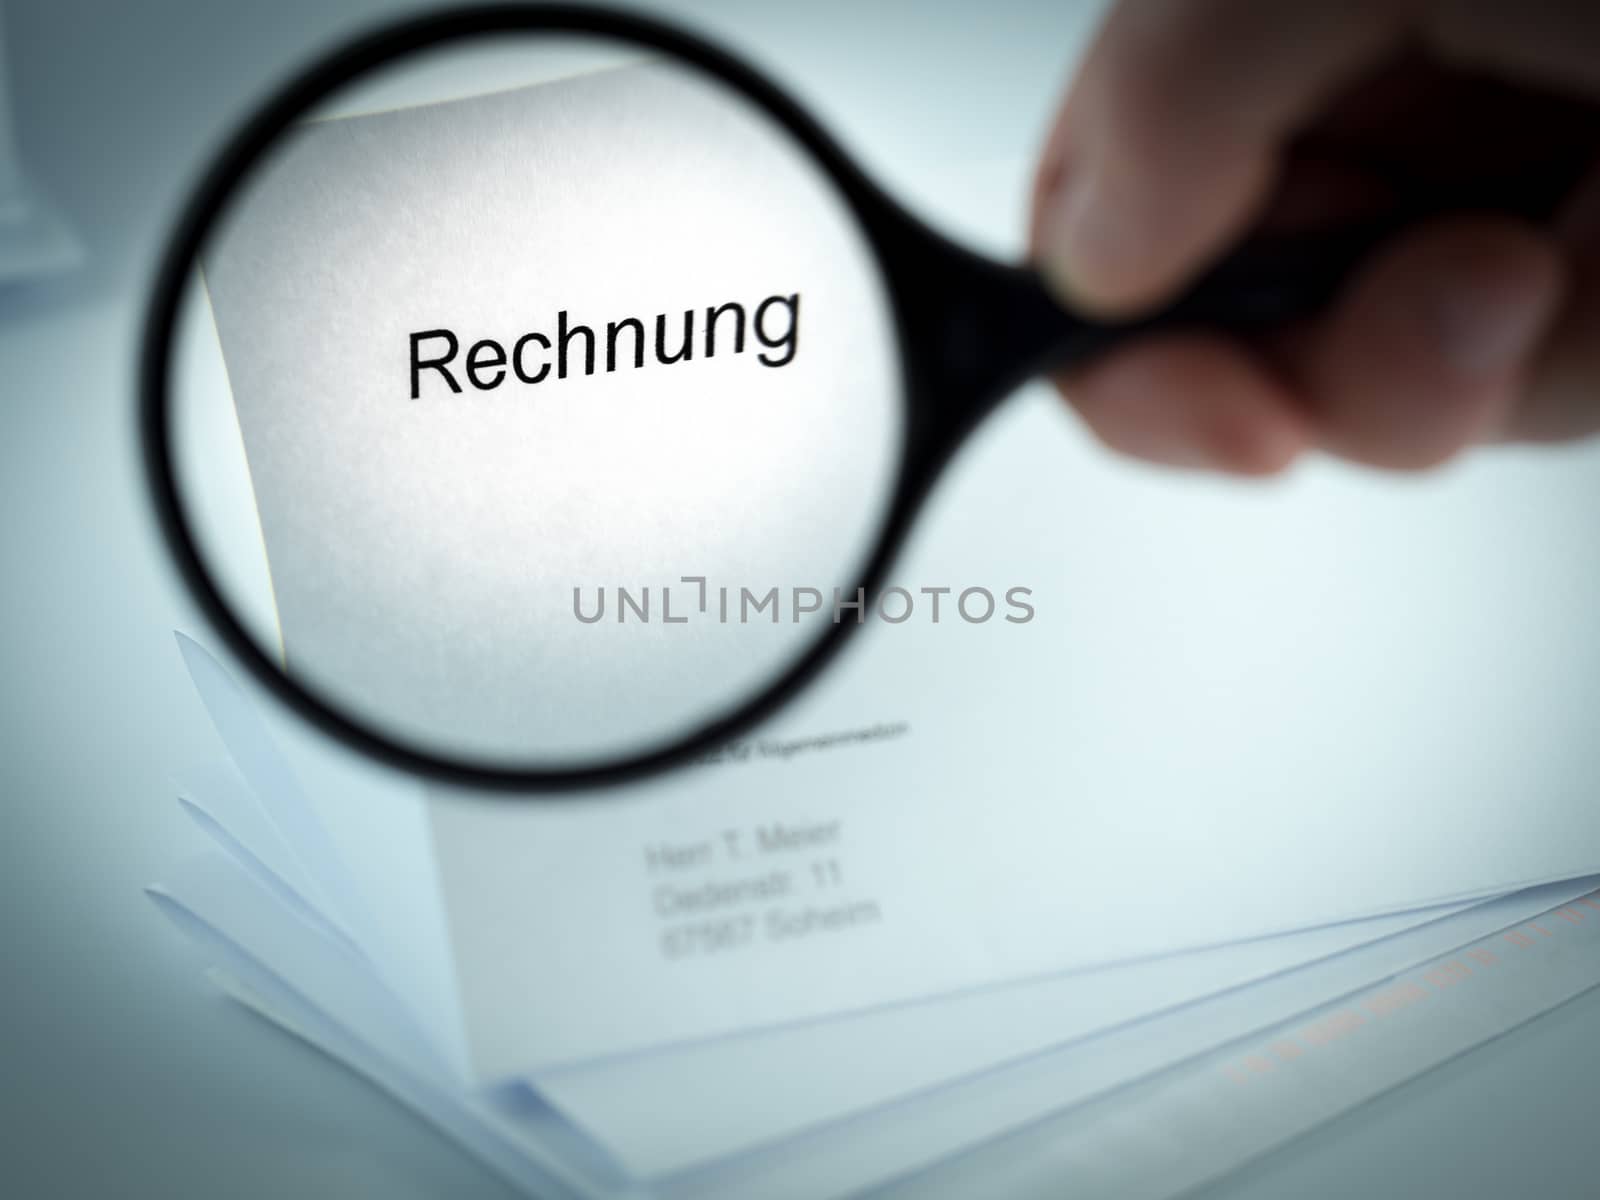 Cover letter with the word Rechnung in the letterhead